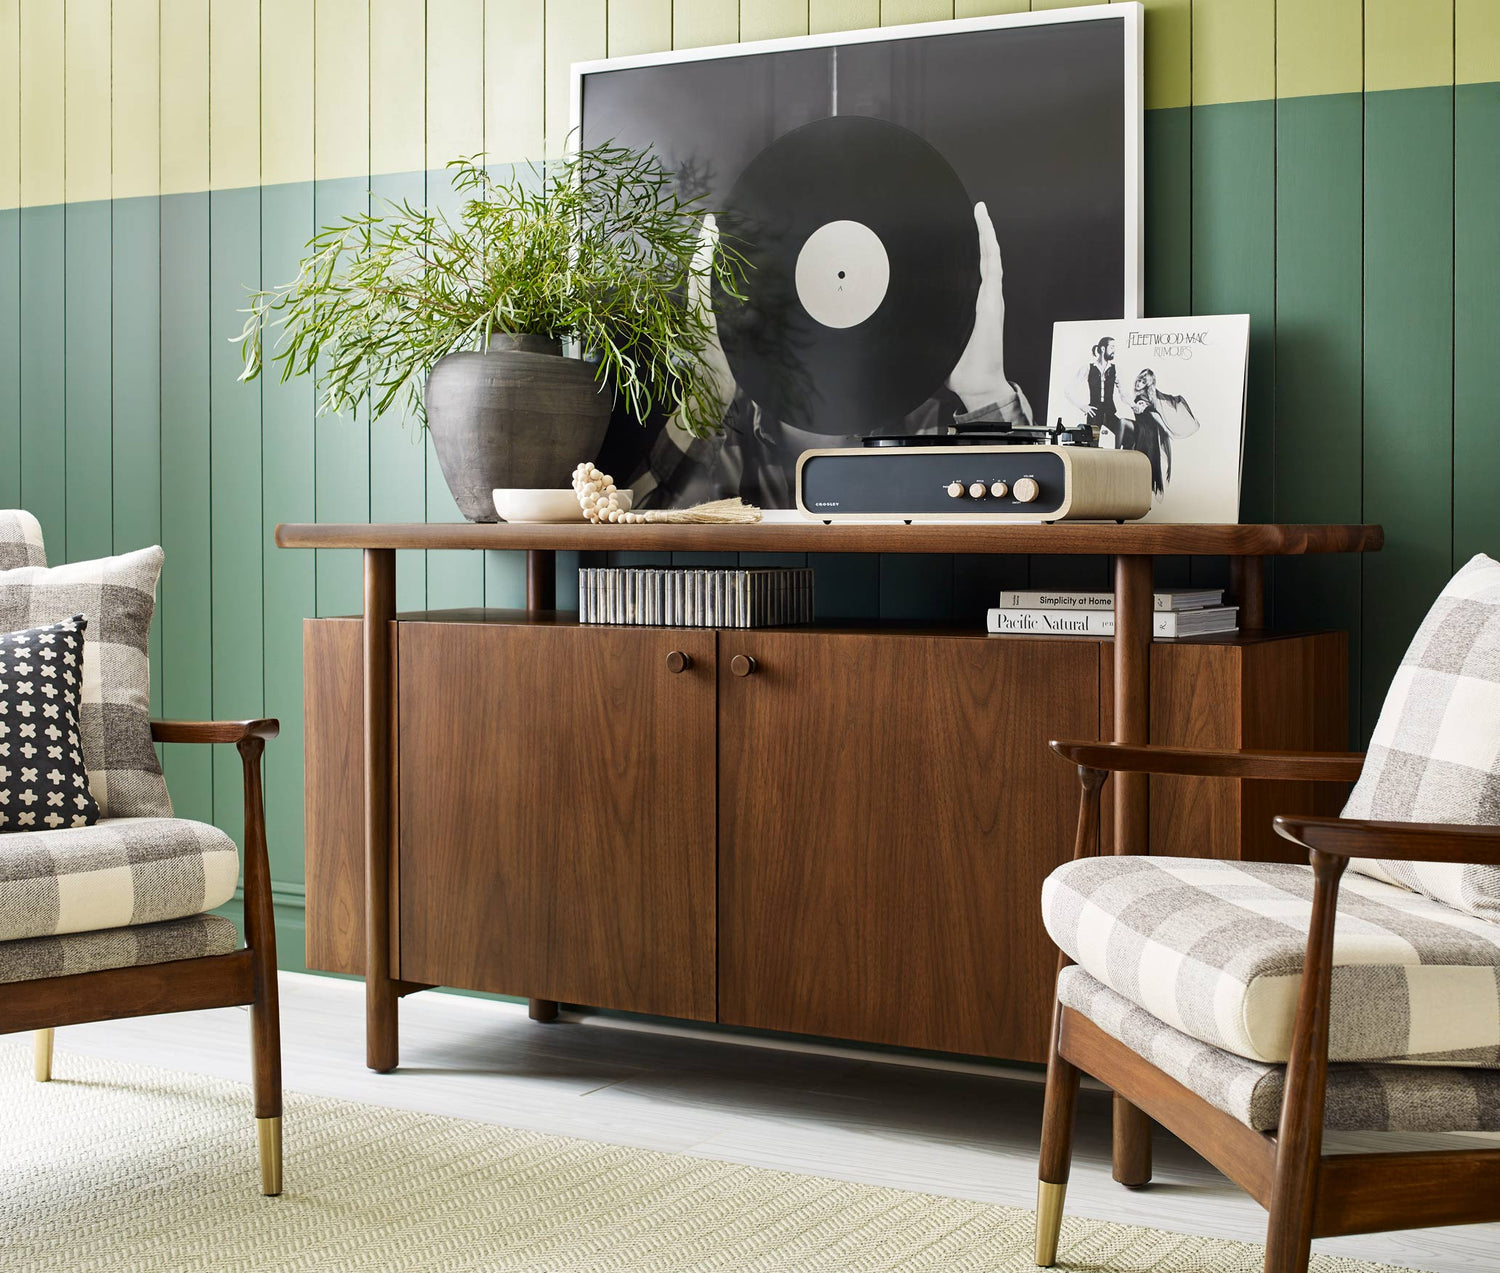 Lifestyle of a Walnut Grove Credenza that has a record player and large potted plant on top of it, it is against a dark green and light green paneled wall with two Walnut Grove chairs in front of it